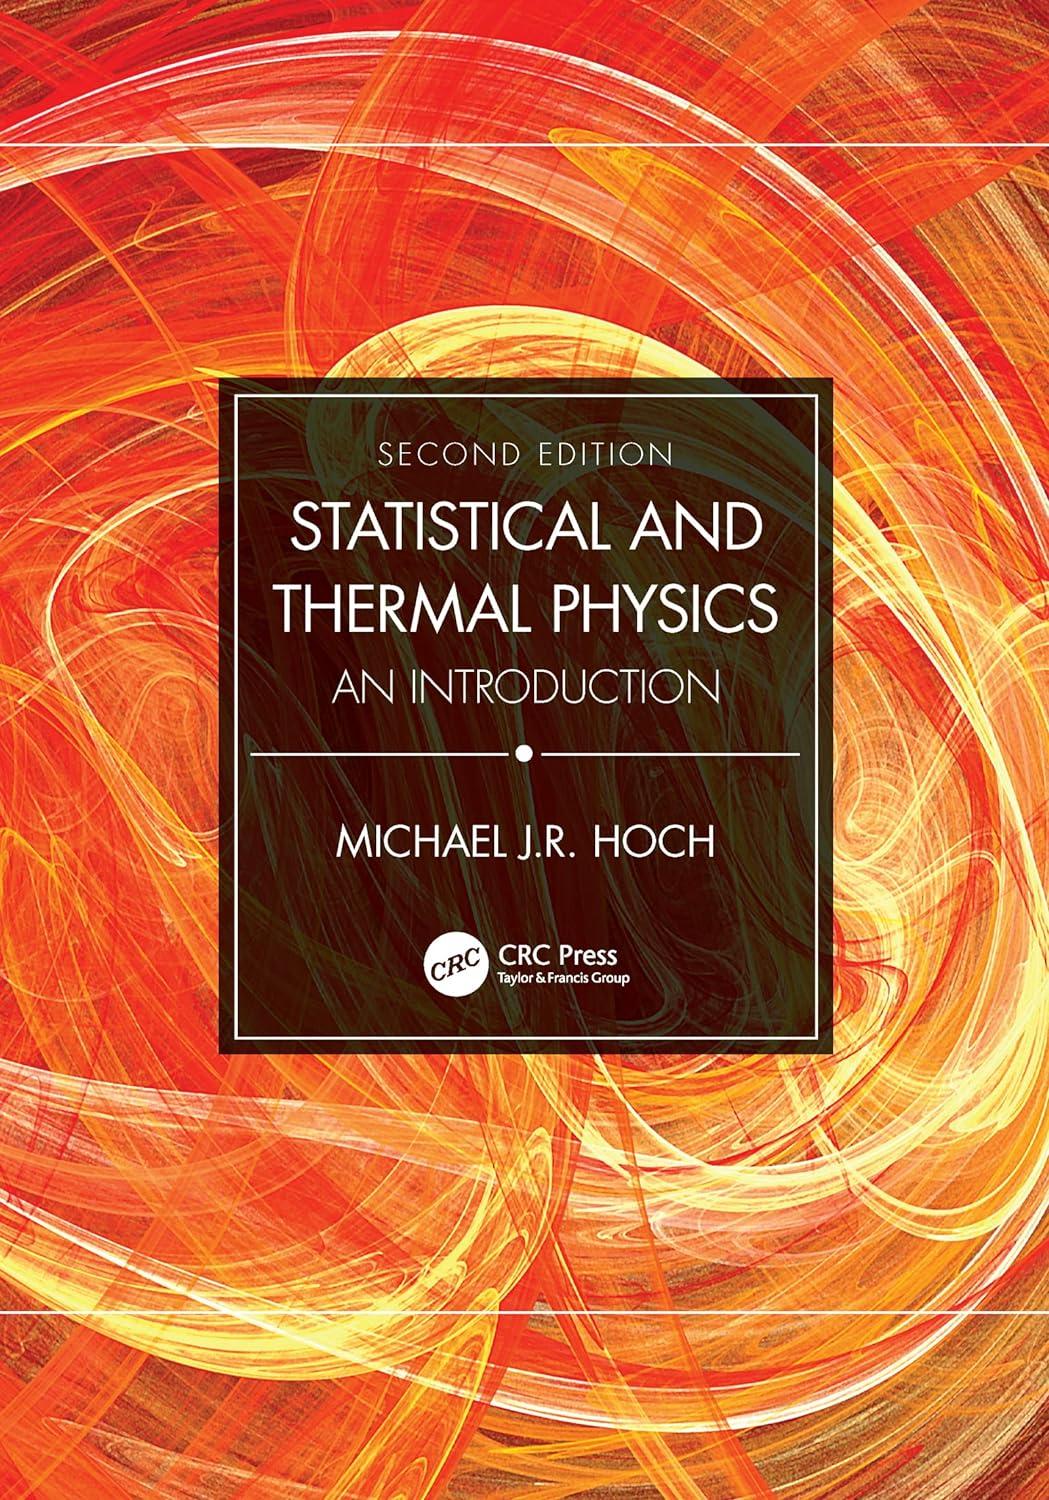 statistical and thermal physics an introduction 2nd edition michael j.r. hoch 036746134x, 978-0367461348